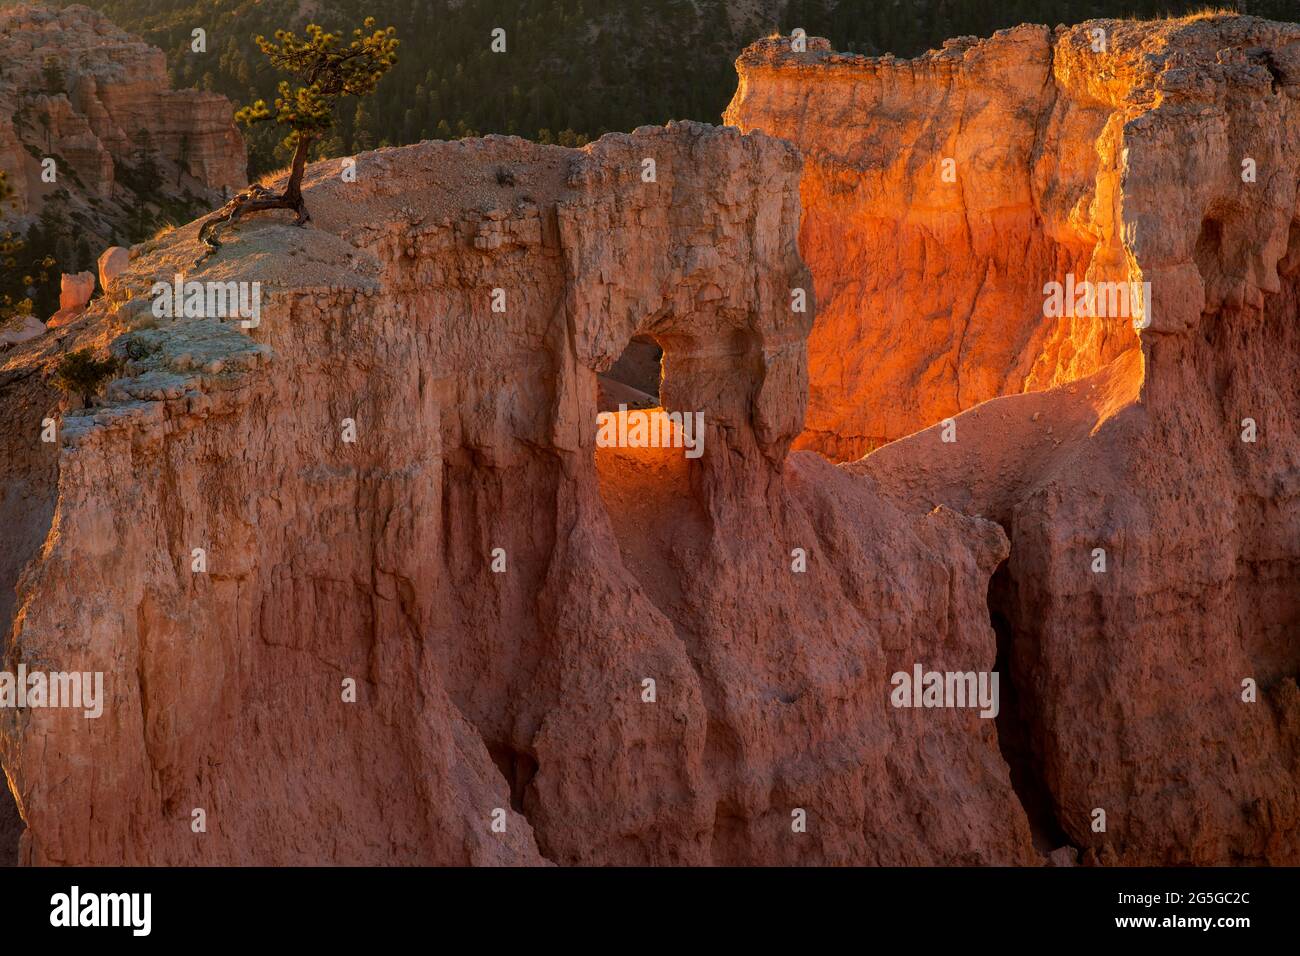 A pine tree growing above a window at sunrise in Bryce Ampitheater, Bryce Canyon National Park Stock Photo